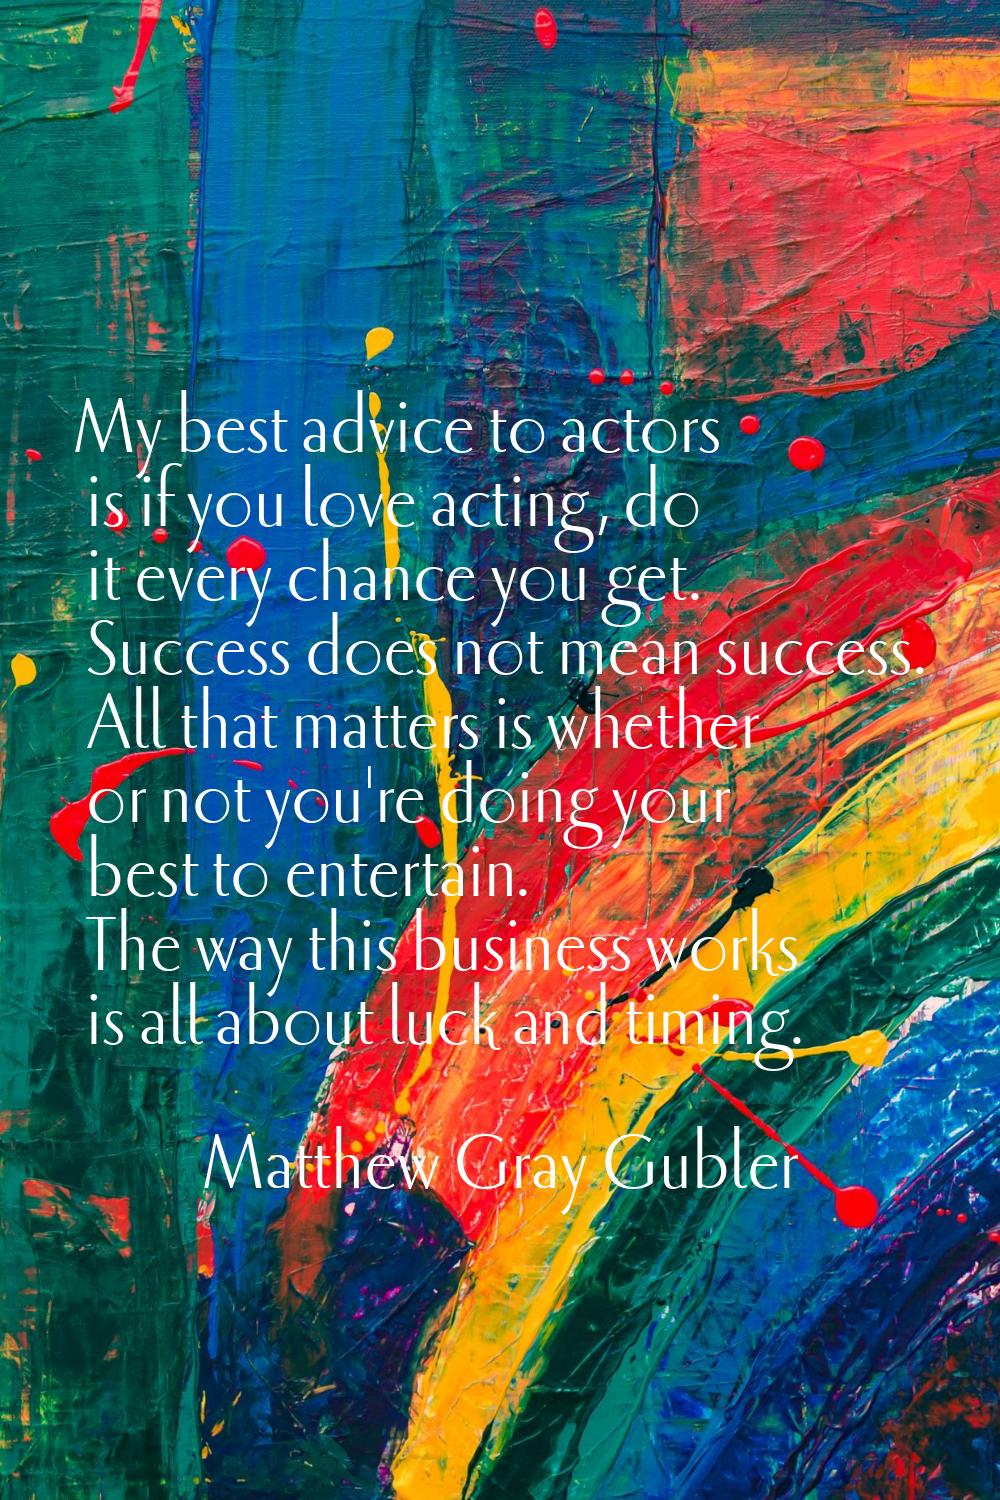 My best advice to actors is if you love acting, do it every chance you get. Success does not mean s